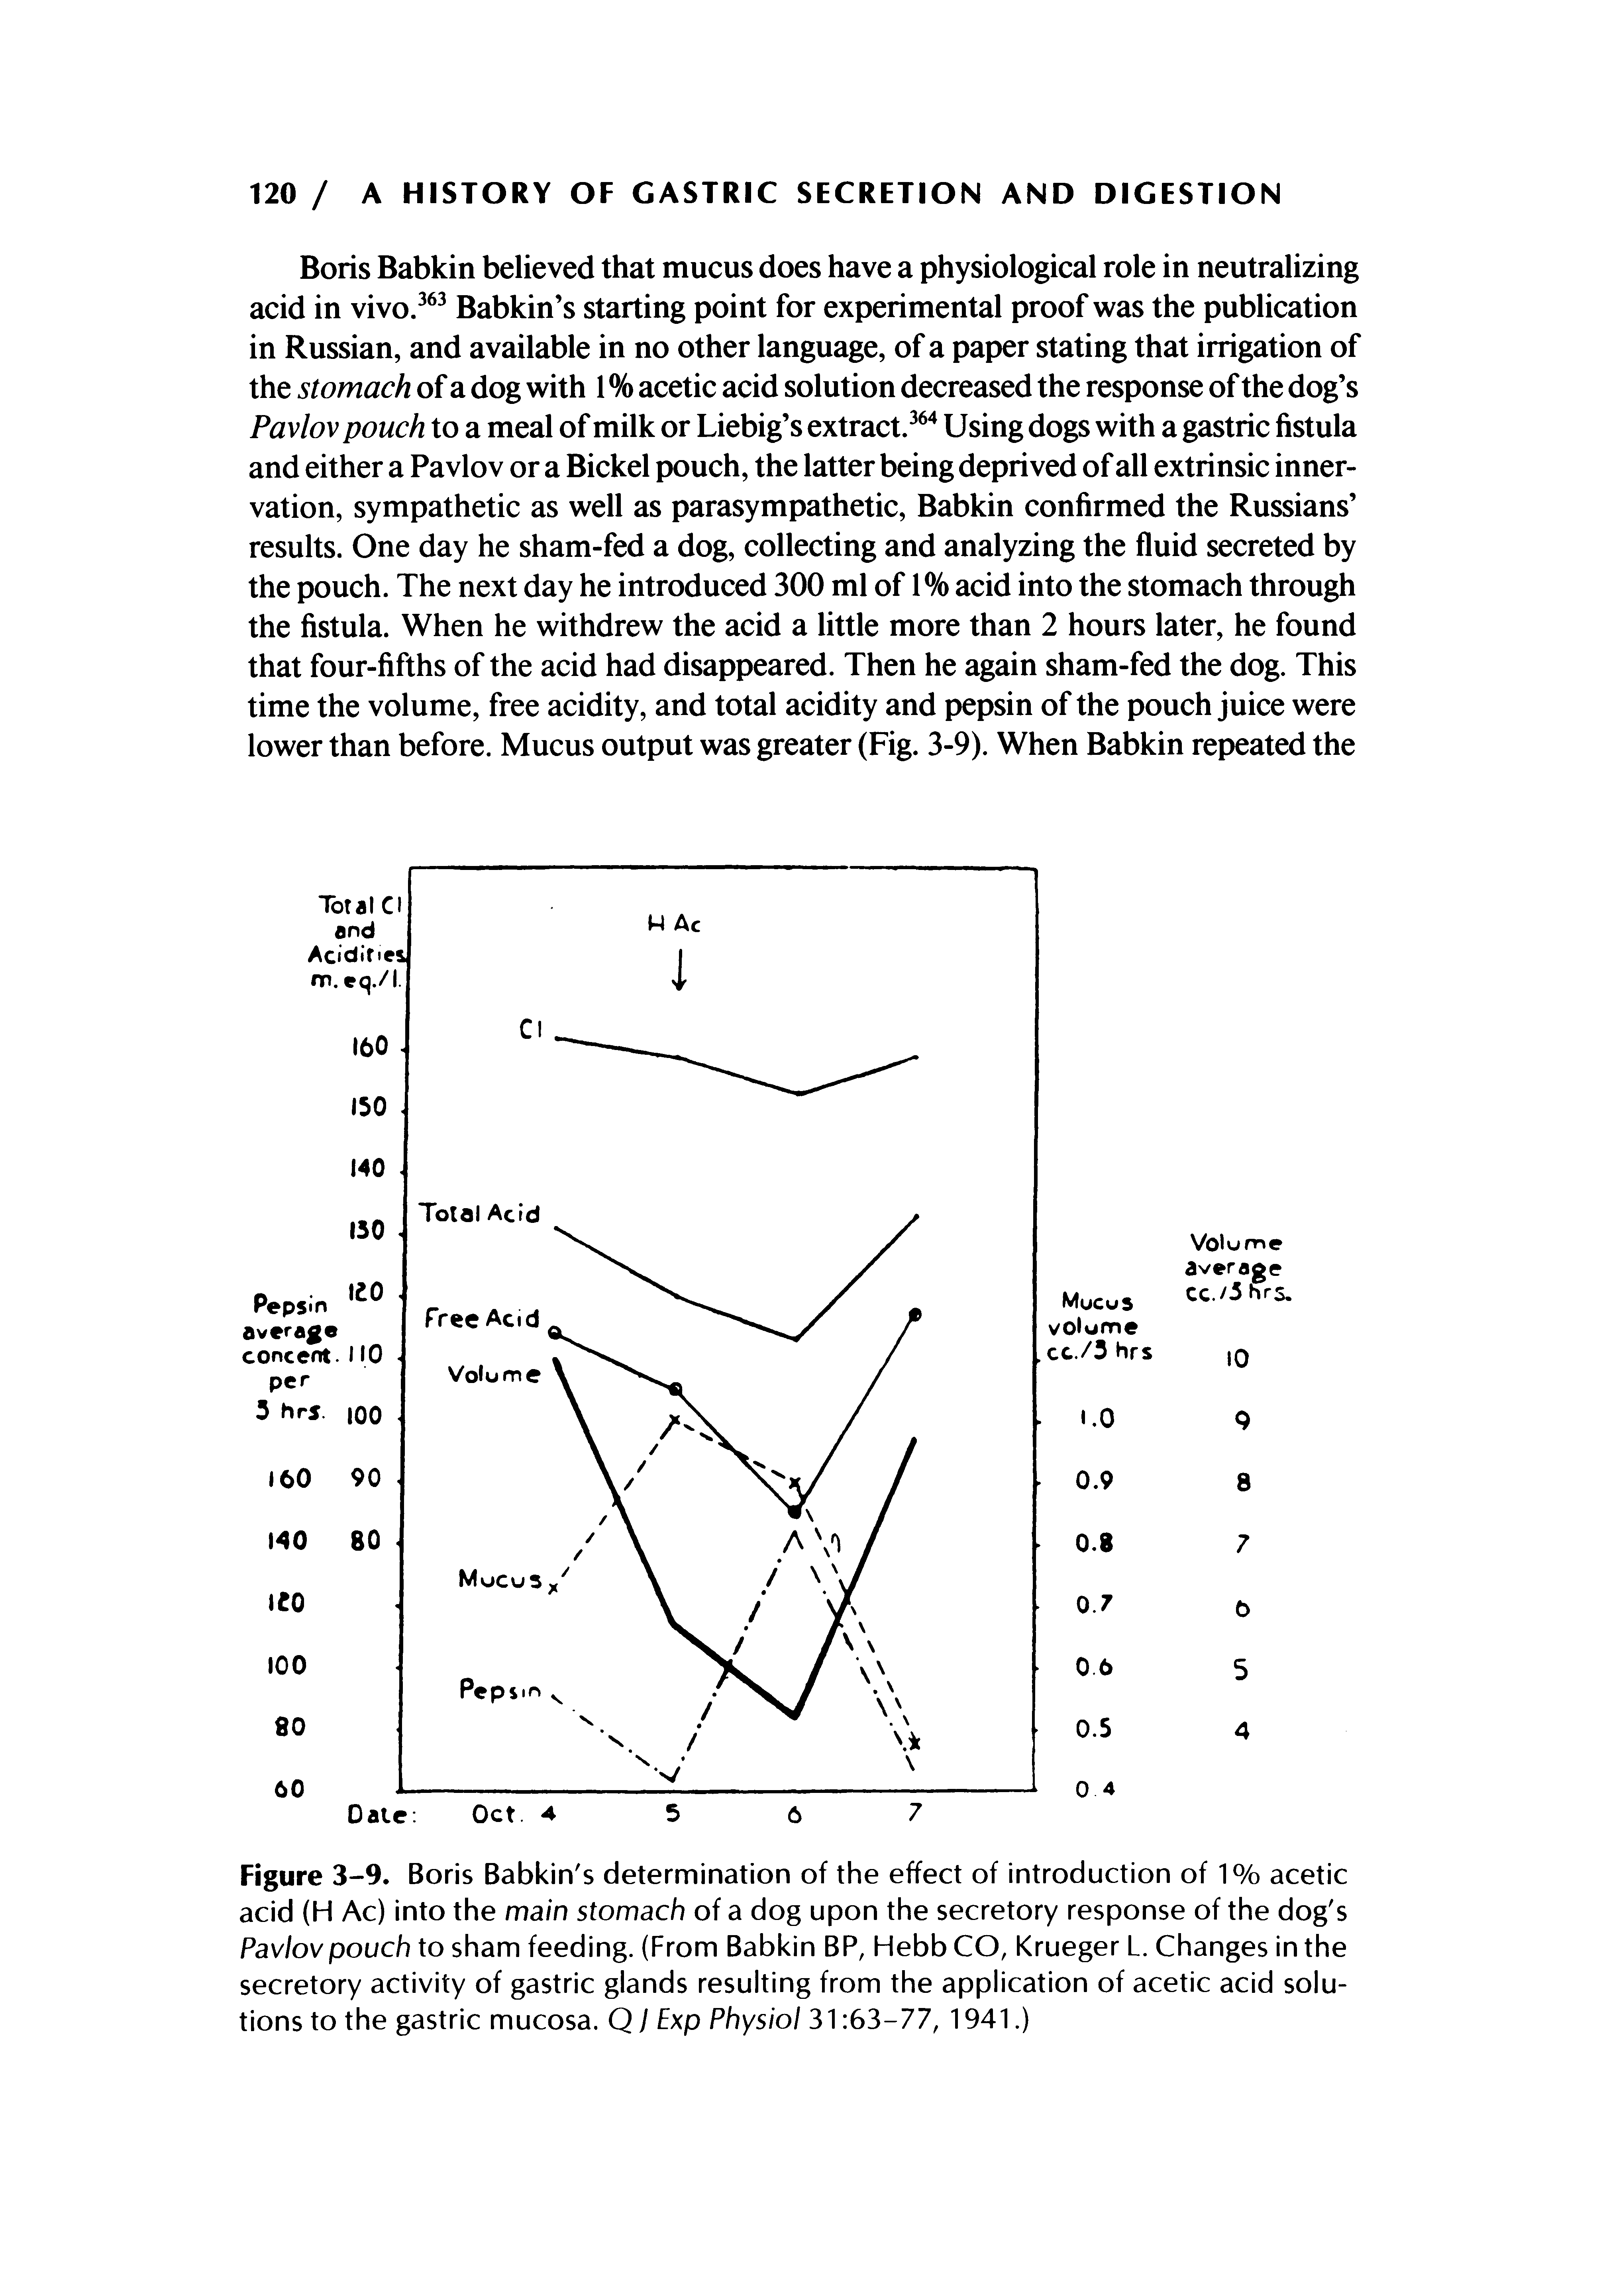 Figure 3-9. Boris Babkin s determination of the effect of introduction of 1% acetic acid (H Ac) into the main stomach of a dog upon the secretory response of the dog s Pavlov pouch to sham feeding. (From Babkin BP, Hebb CO, Krueger L. Changes in the secretory activity of gastric glands resulting from the application of acetic acid solutions to the gastric mucosa. Q / Exp Physiol 31 63-77, 1941.)...